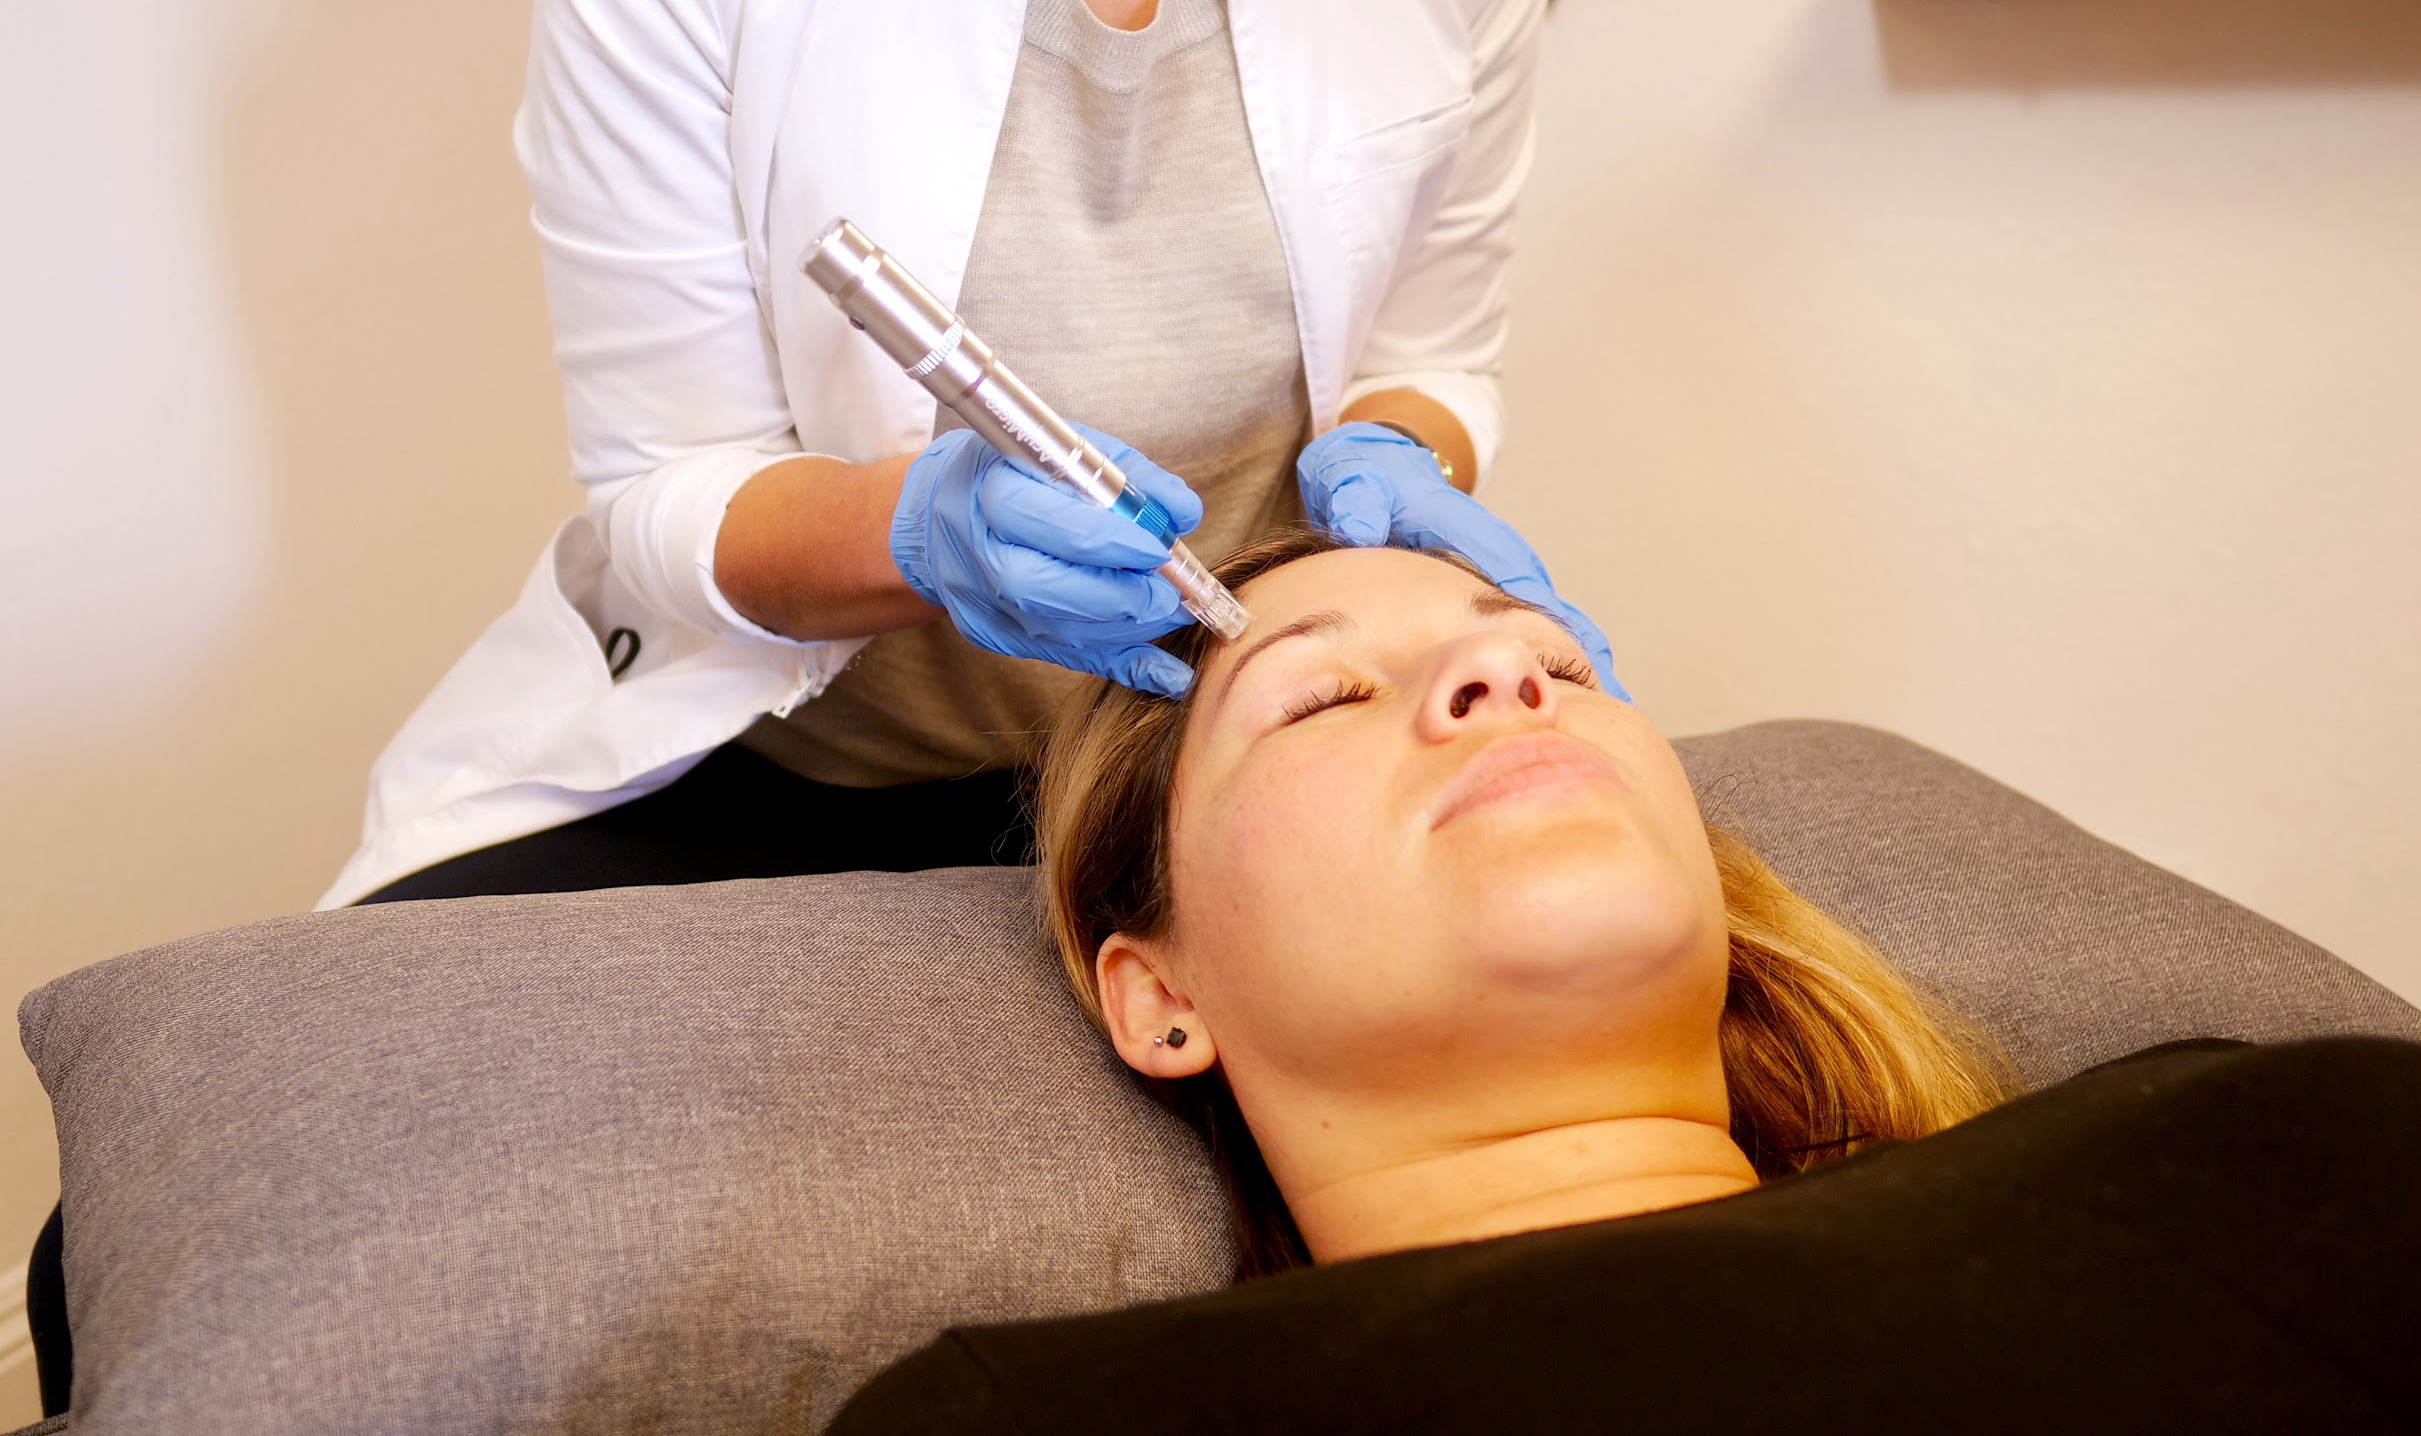 A photograph showing a patient resting supine while the acupuncturist uses a microneedling pen to reduce fine lines on her forehead.